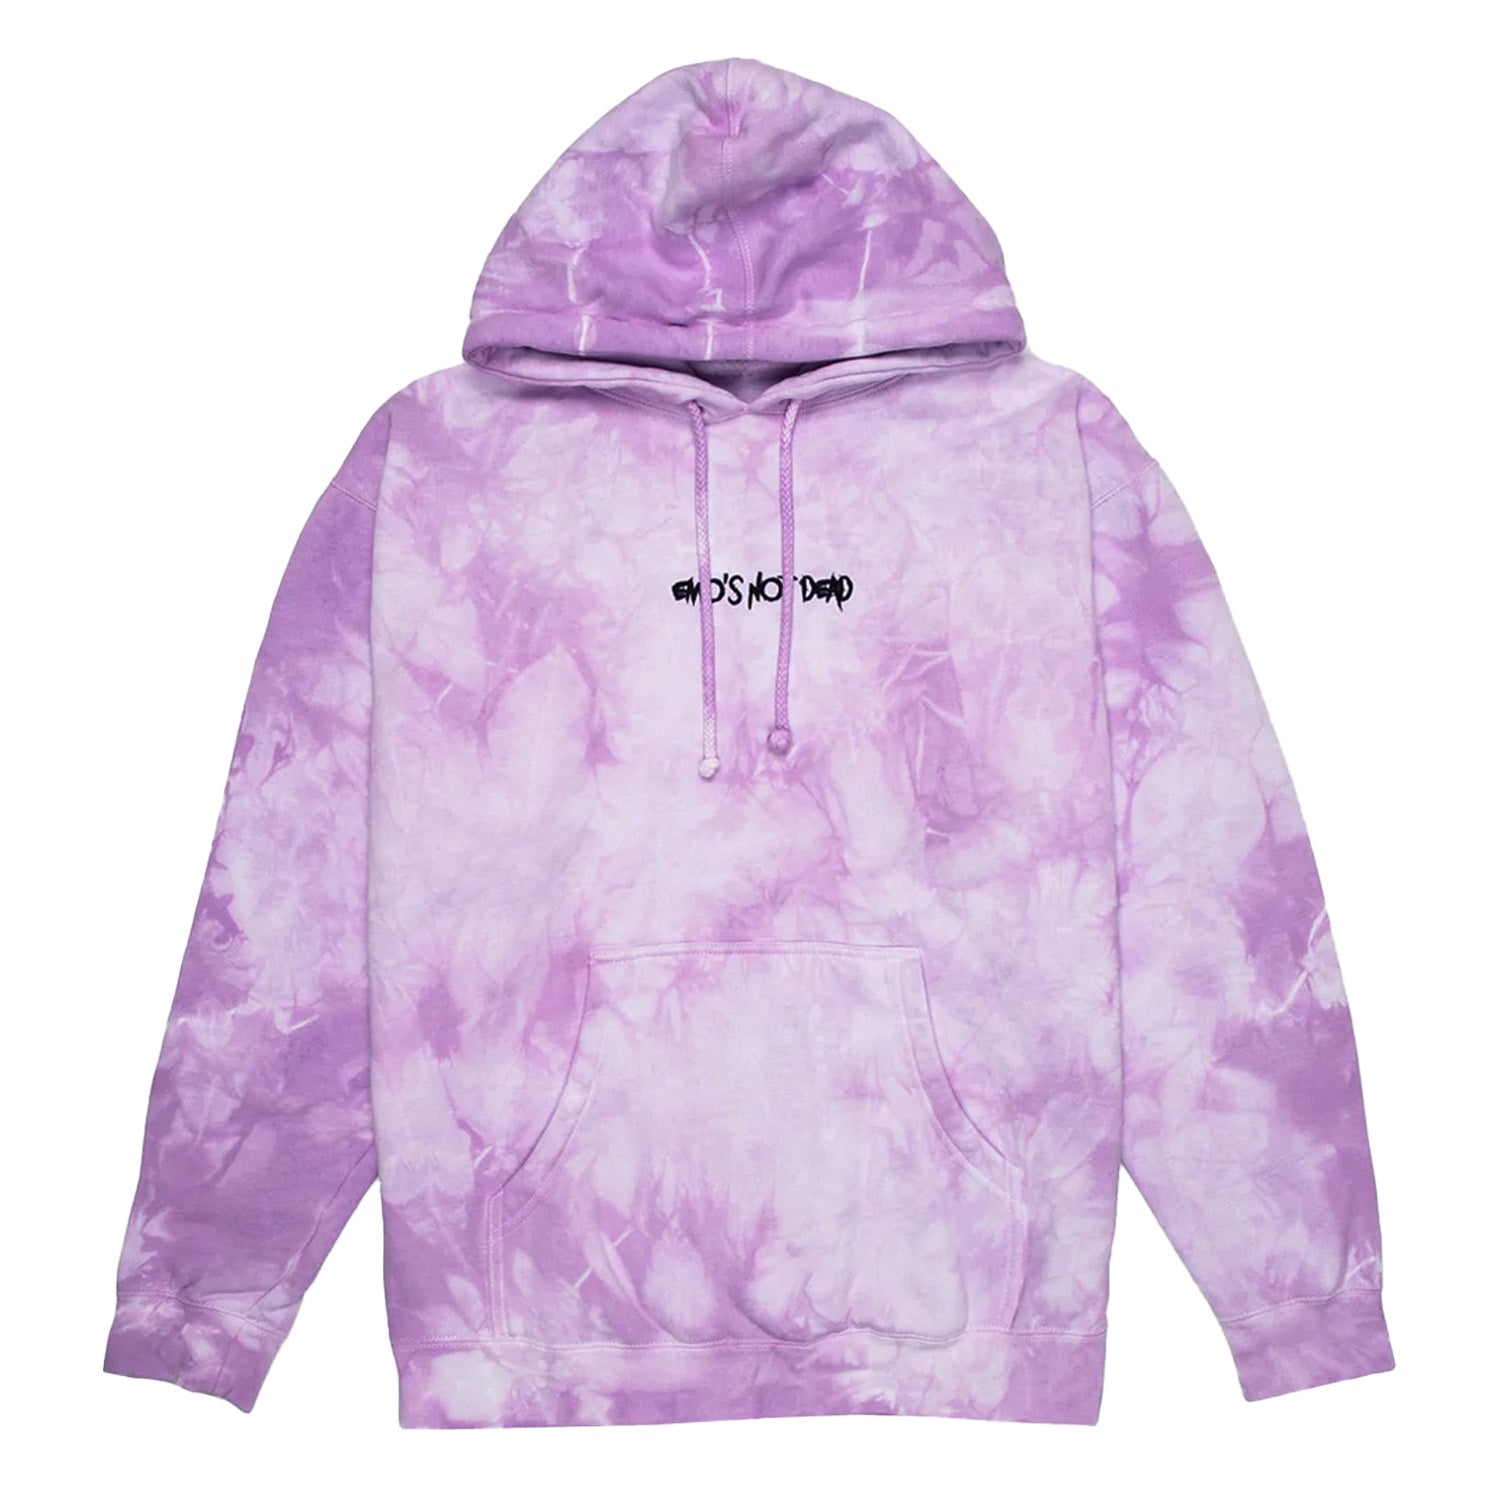 Boo™ with Tie-Dye Hoodie, 9 in